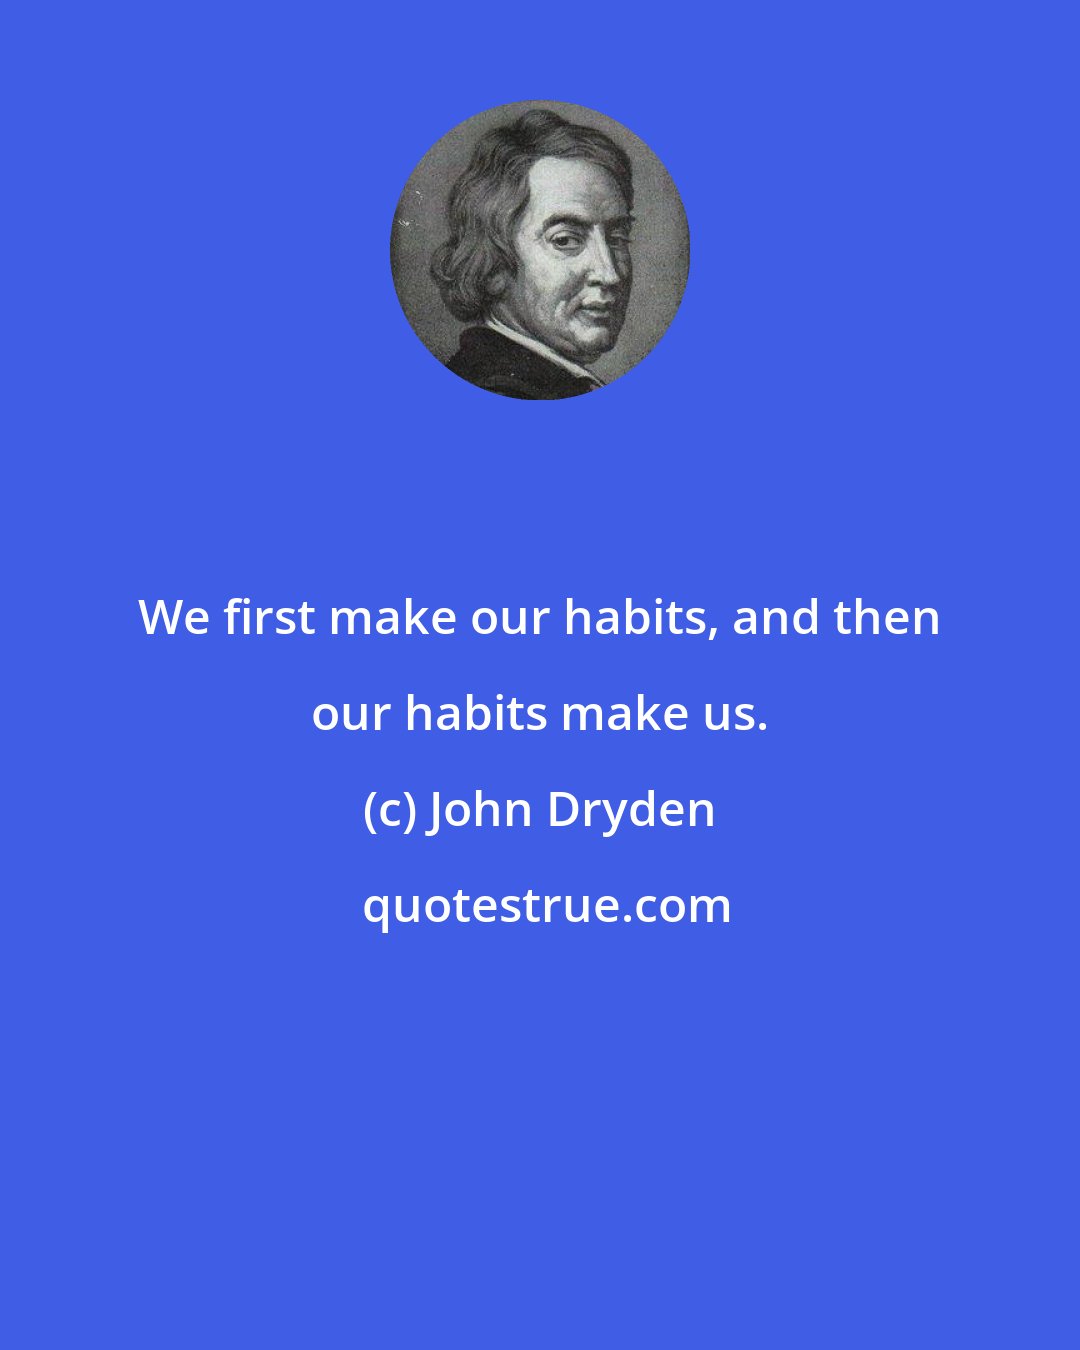 John Dryden: We first make our habits, and then our habits make us.